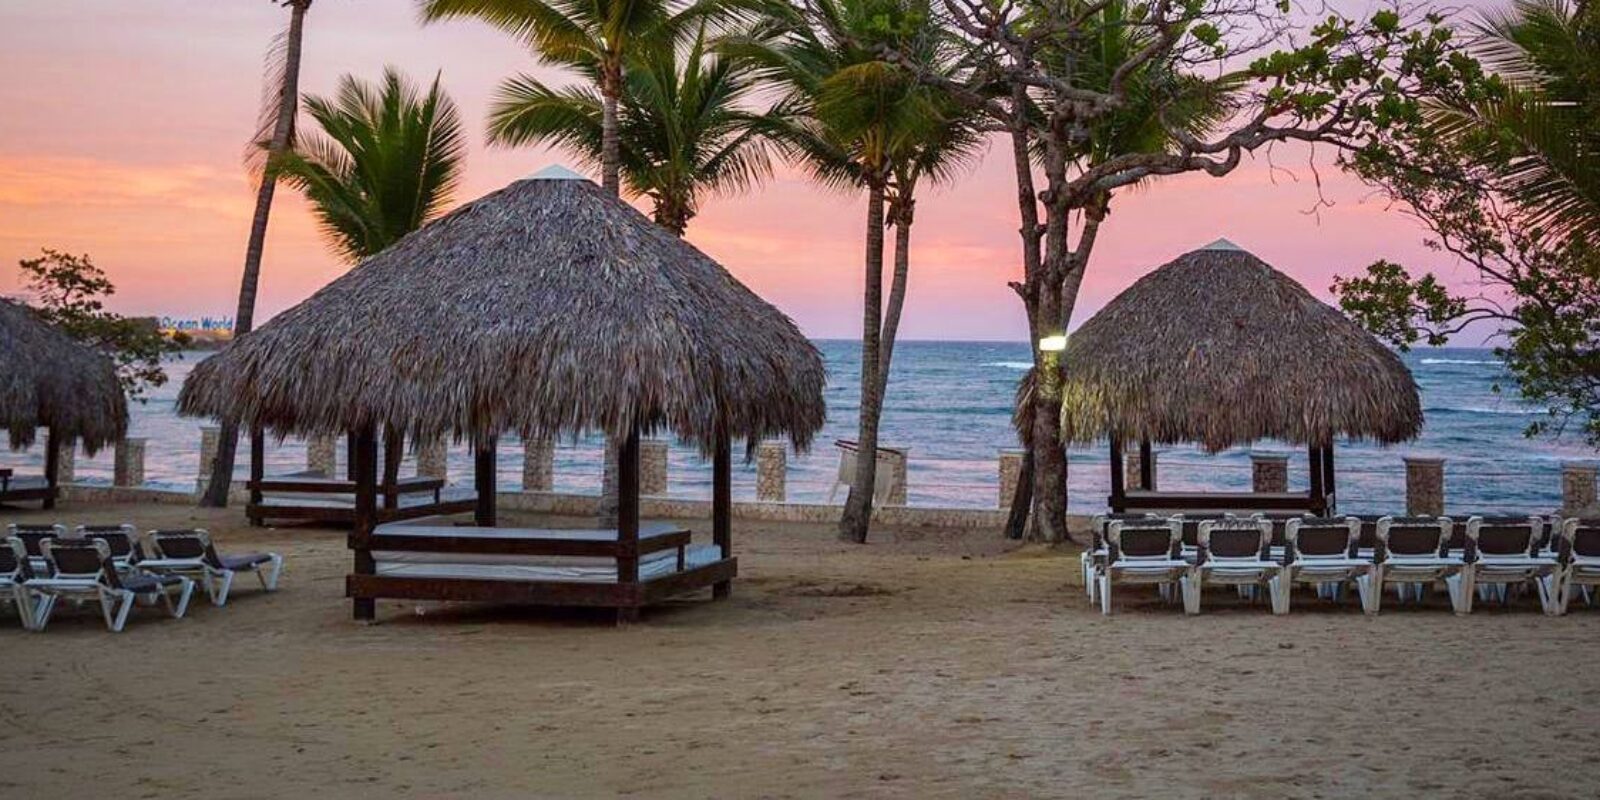 Watch the sunset in the shade of an oceanfront cabana at our beach resort in the Dominican Republic.